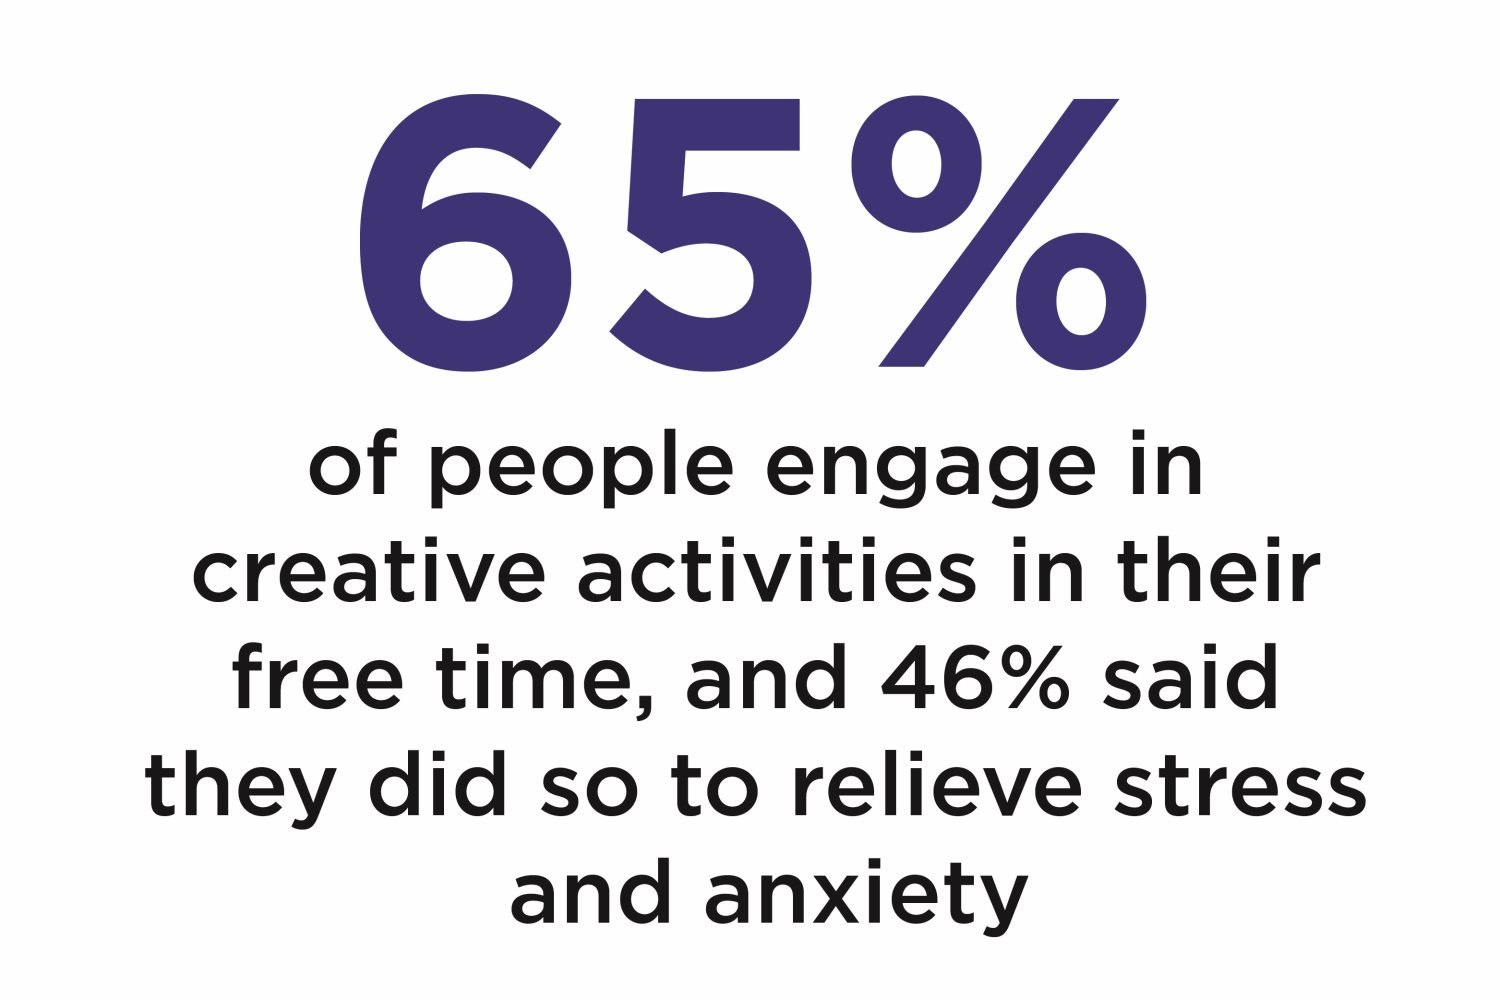 65% of people engage in creative activities in their free time, and 46% said they did so to relieve stress and anxiety